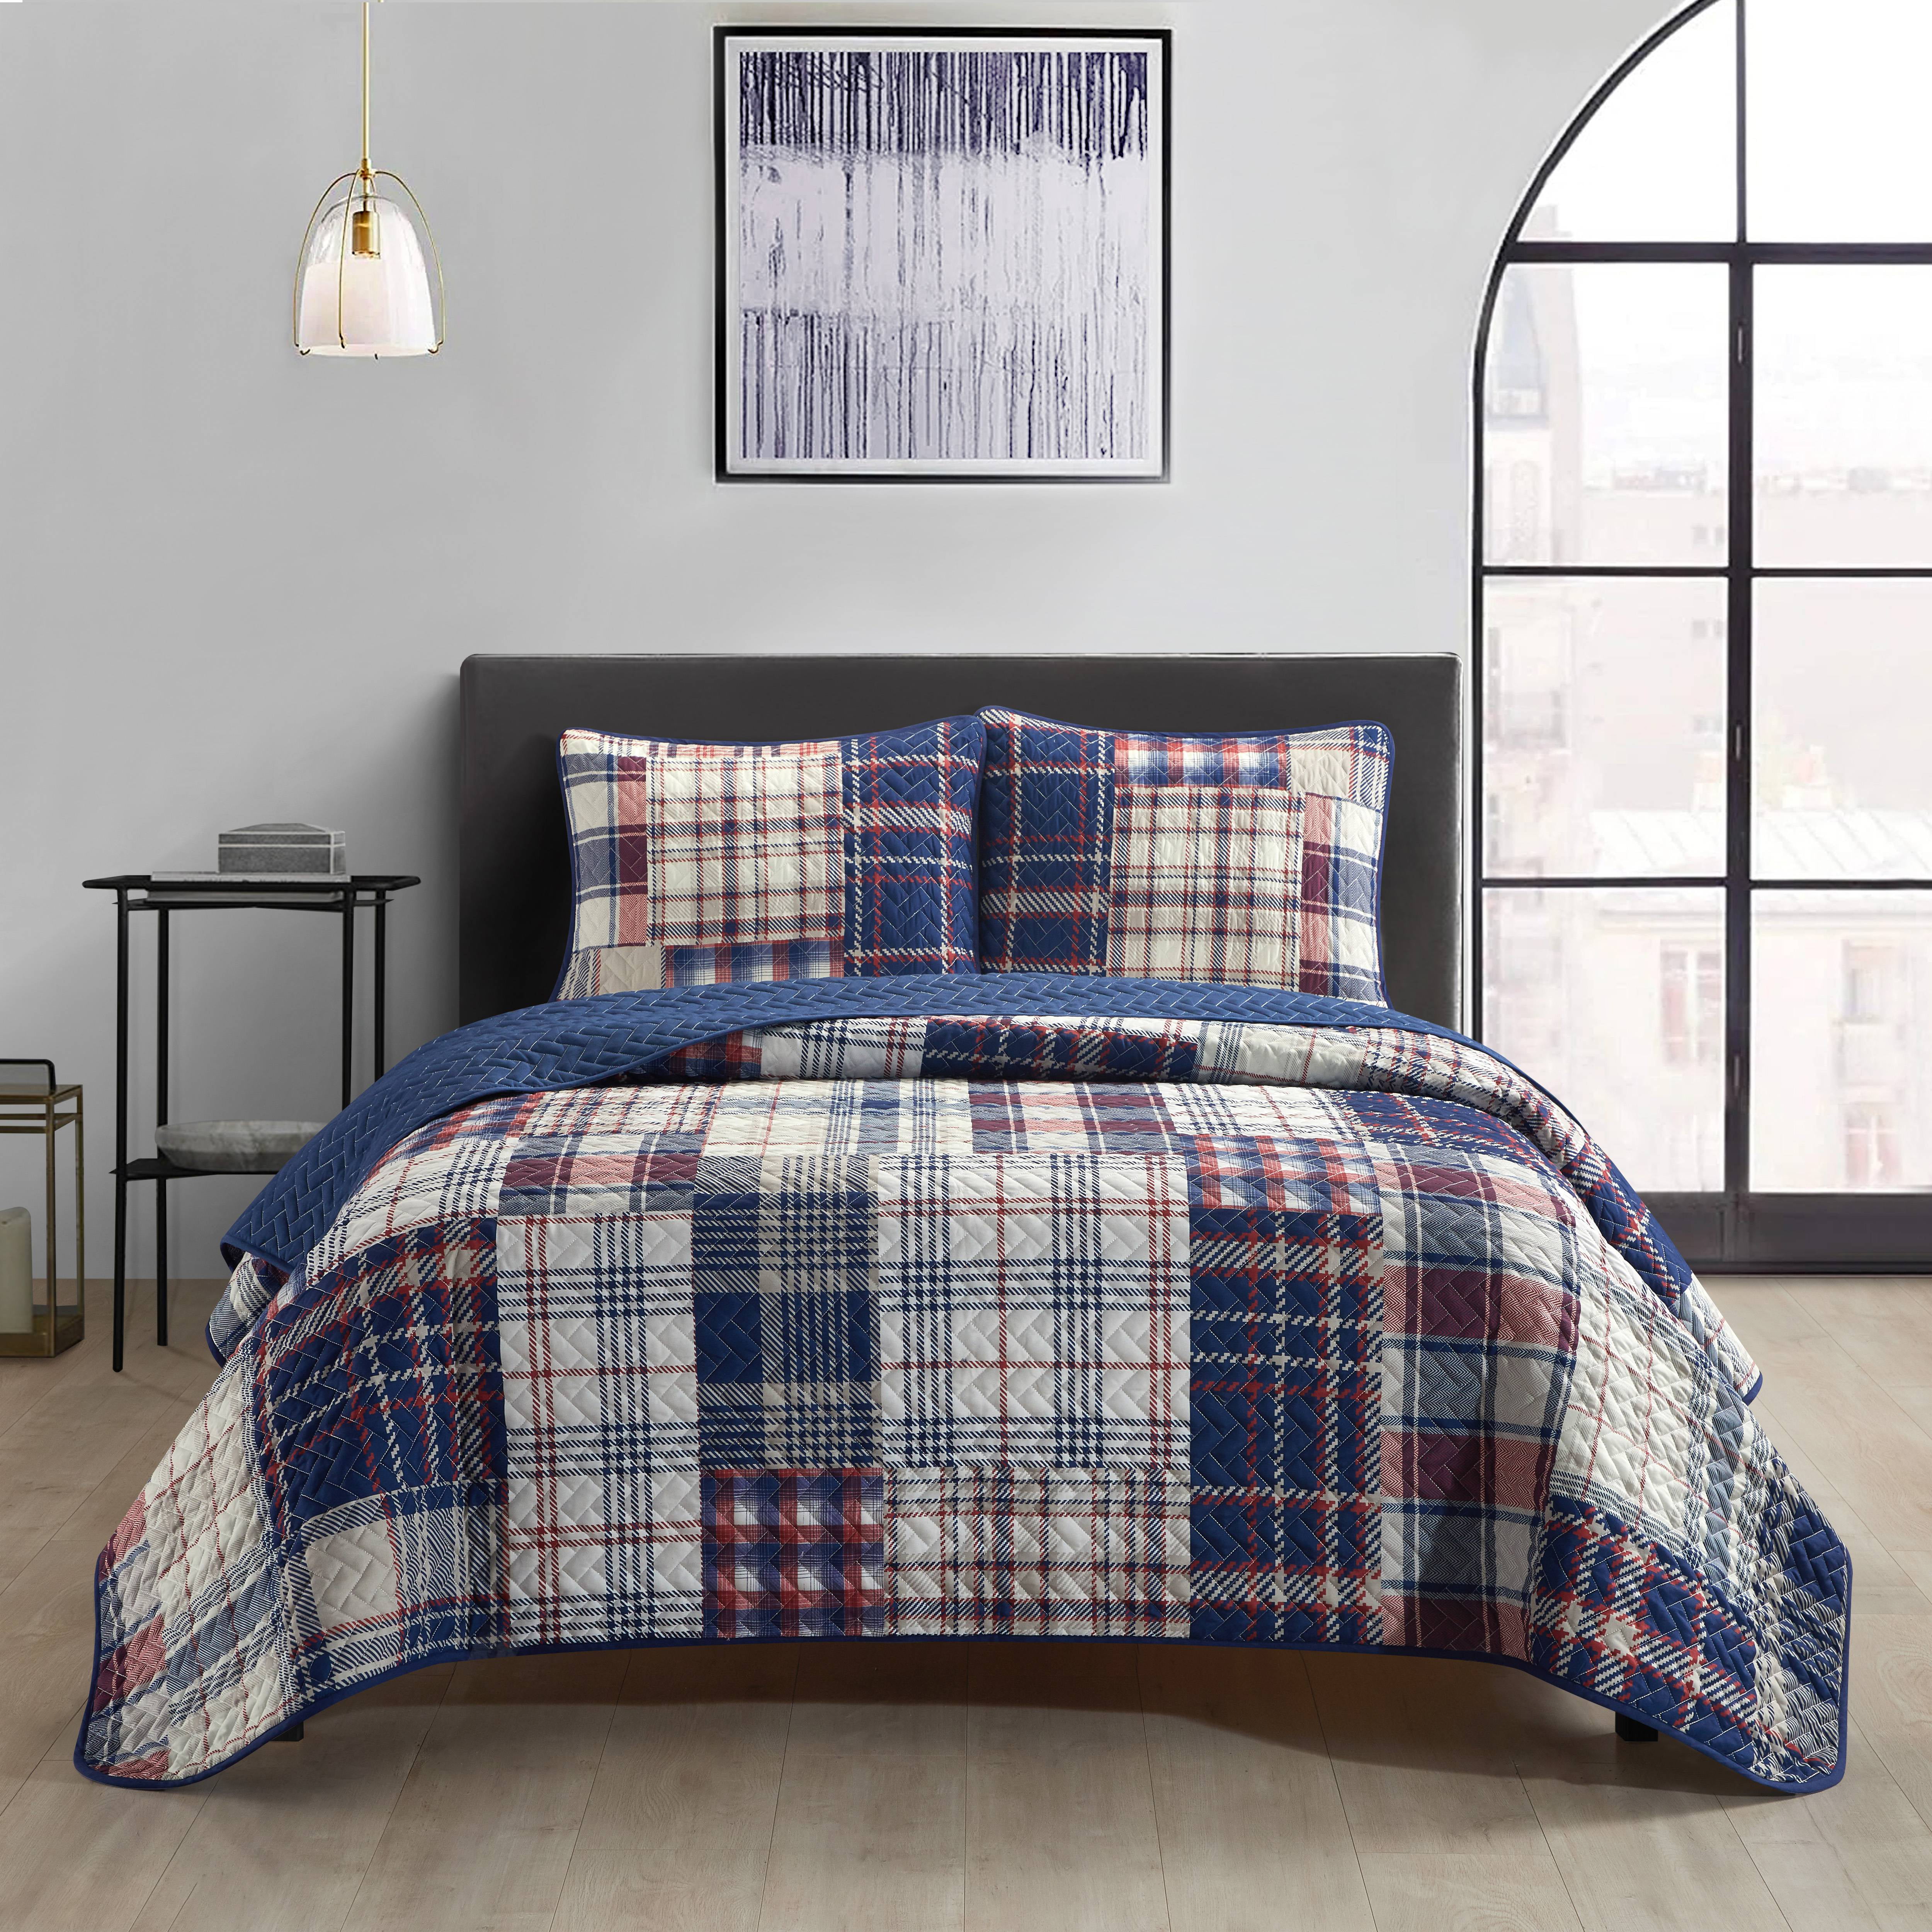 COUNTRY GREY PLAID FARMHOUSE YELLOW GINGHAM FIVE STAR 3pc King QUILT SET 